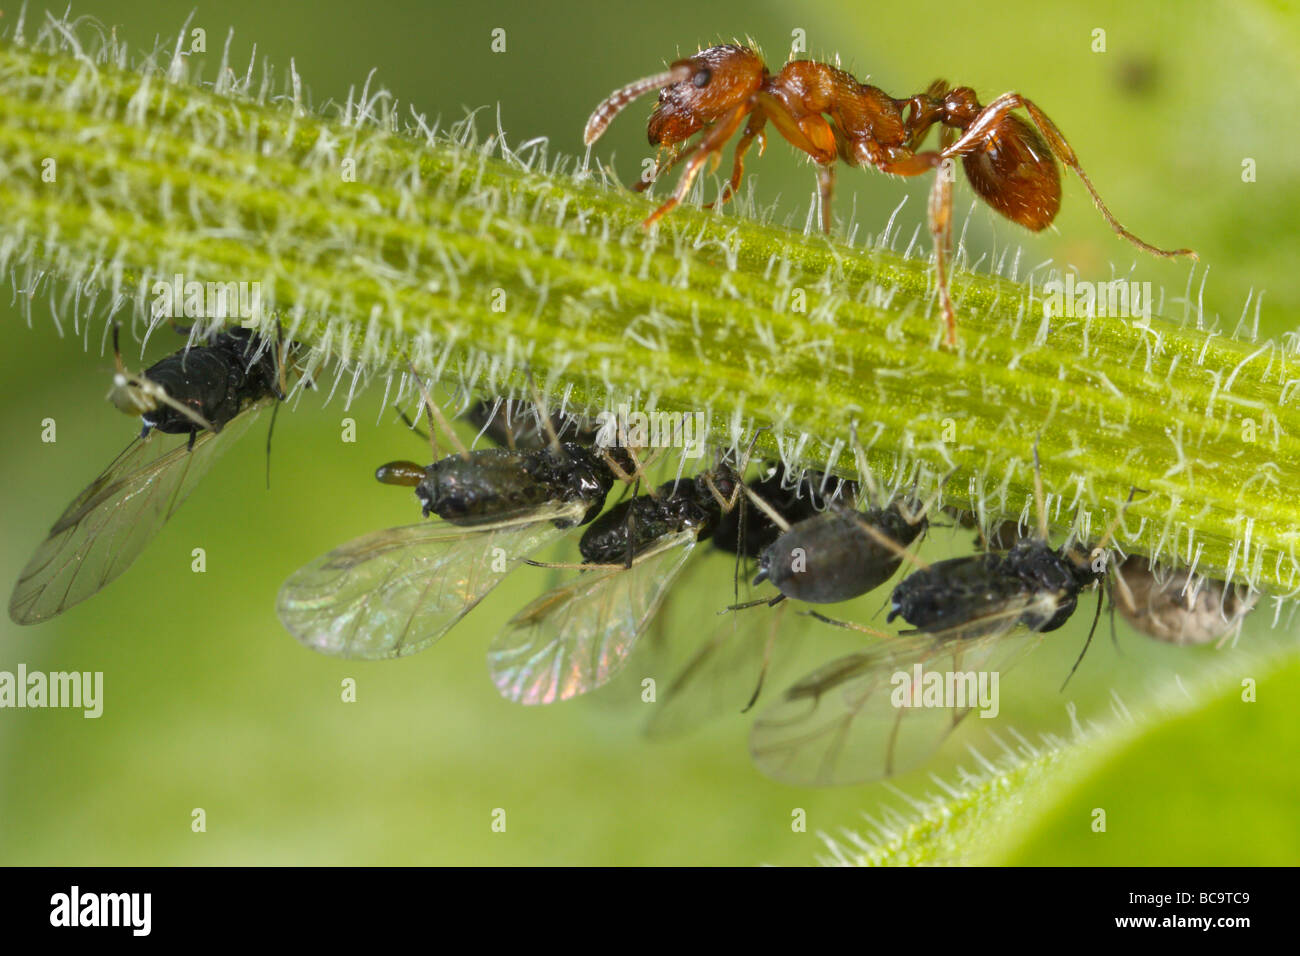 Myrmica ant tending to aphids. They milk these aphids, the honeydew is very rich in sugar. Stock Photo